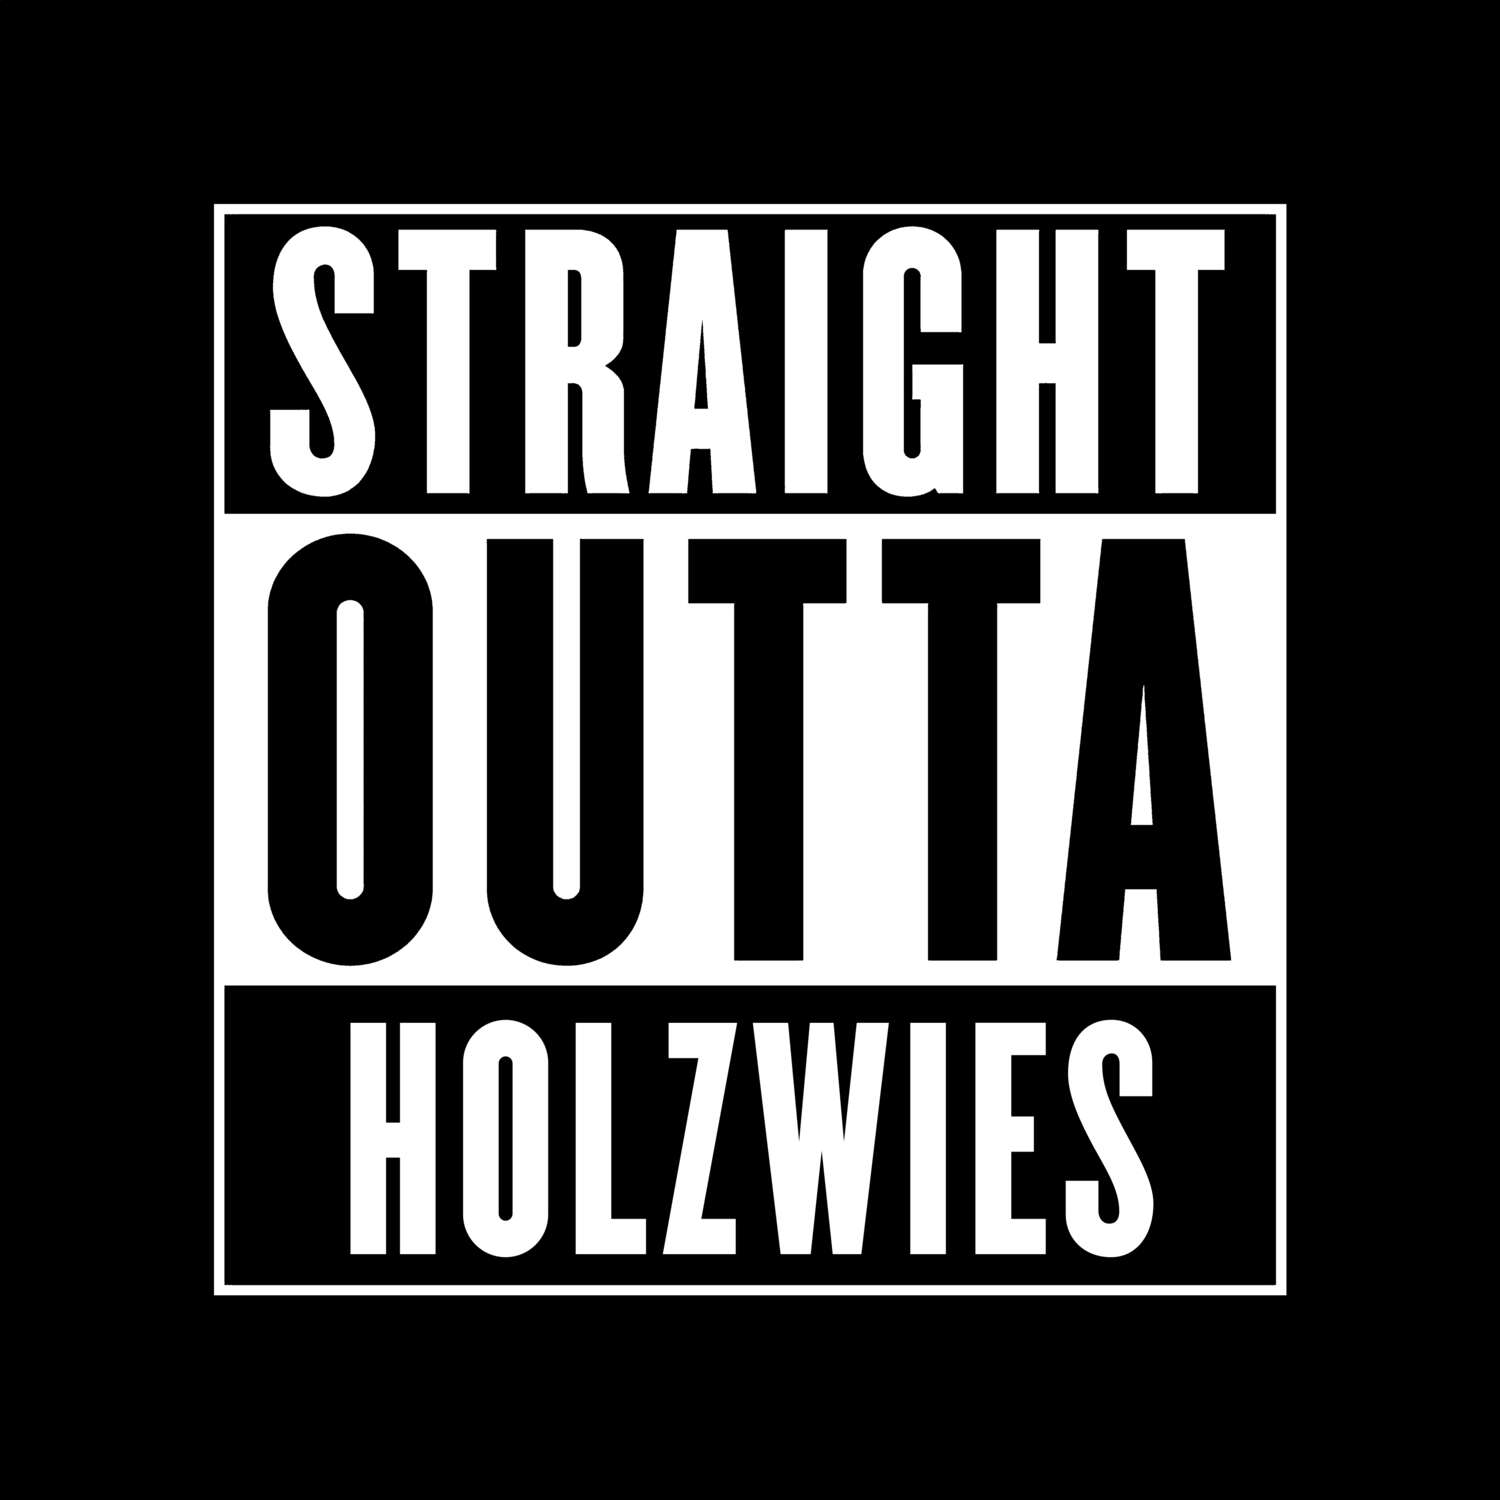 Holzwies T-Shirt »Straight Outta«